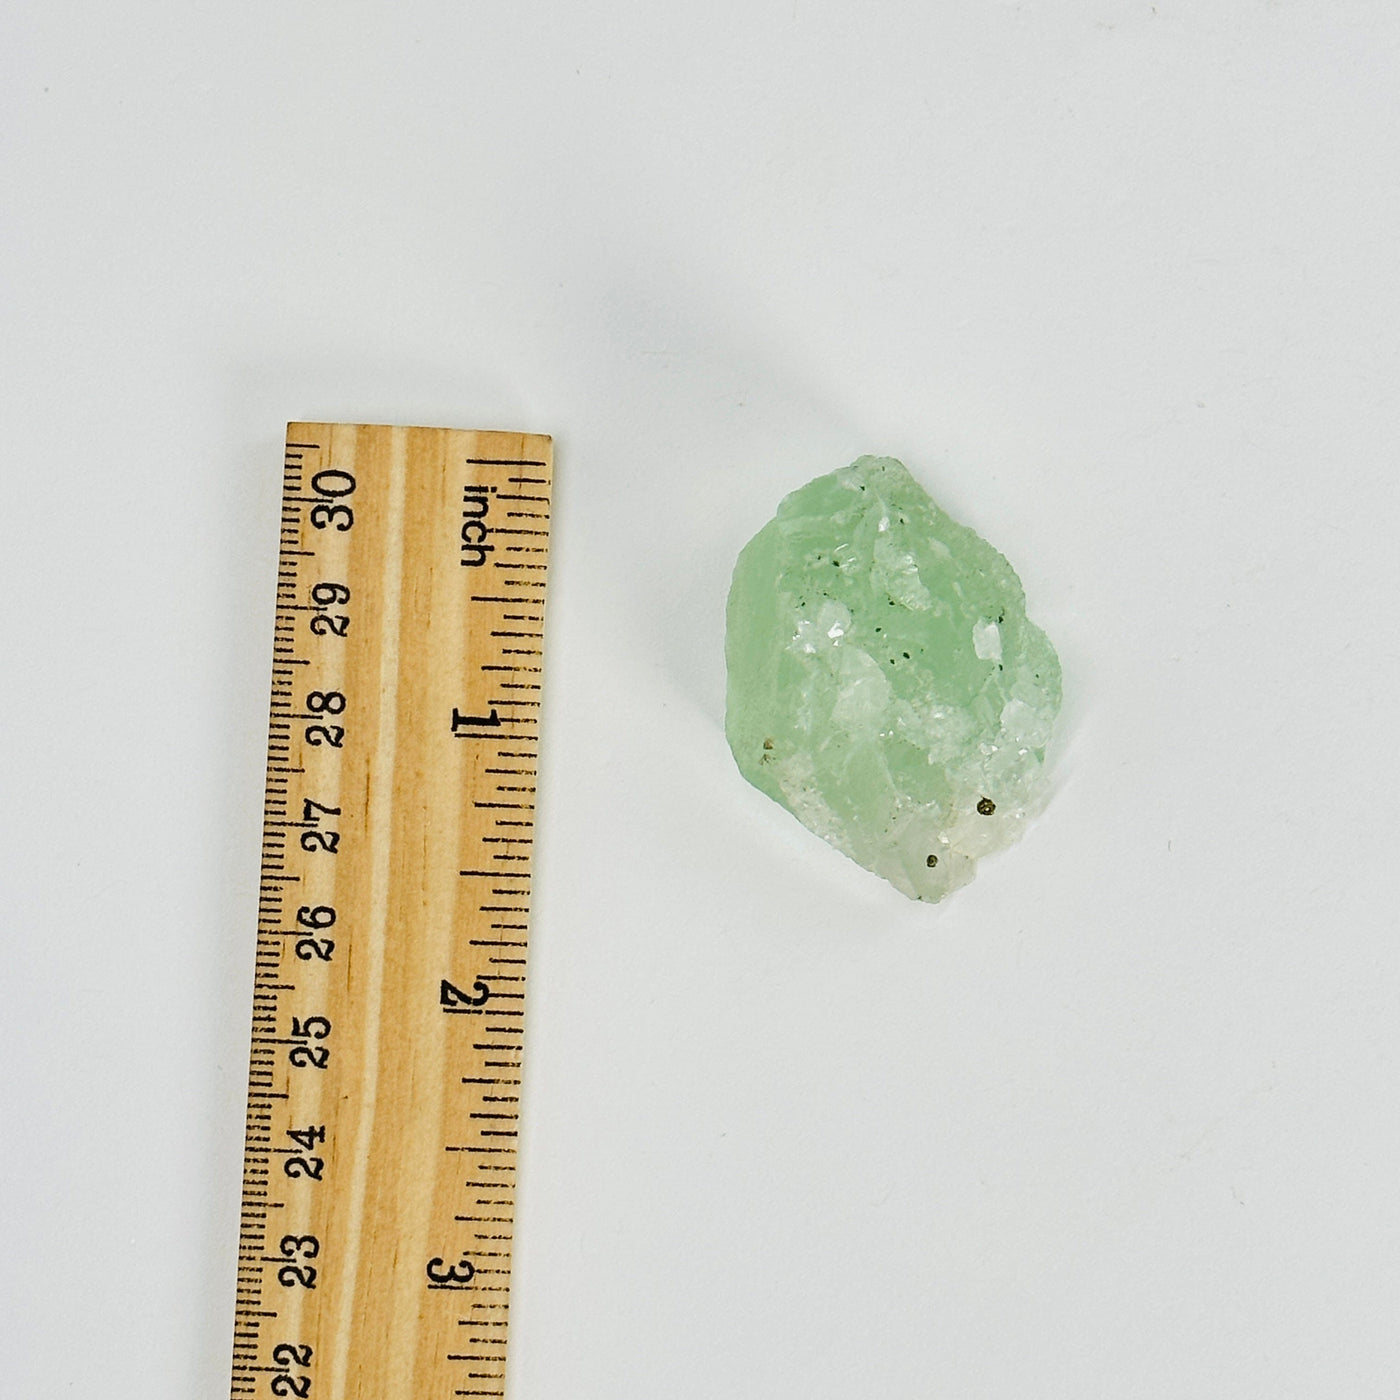 Green Fluorite with Epidote and Crystal Quartz Growth Cluster next to a ruler for size reference